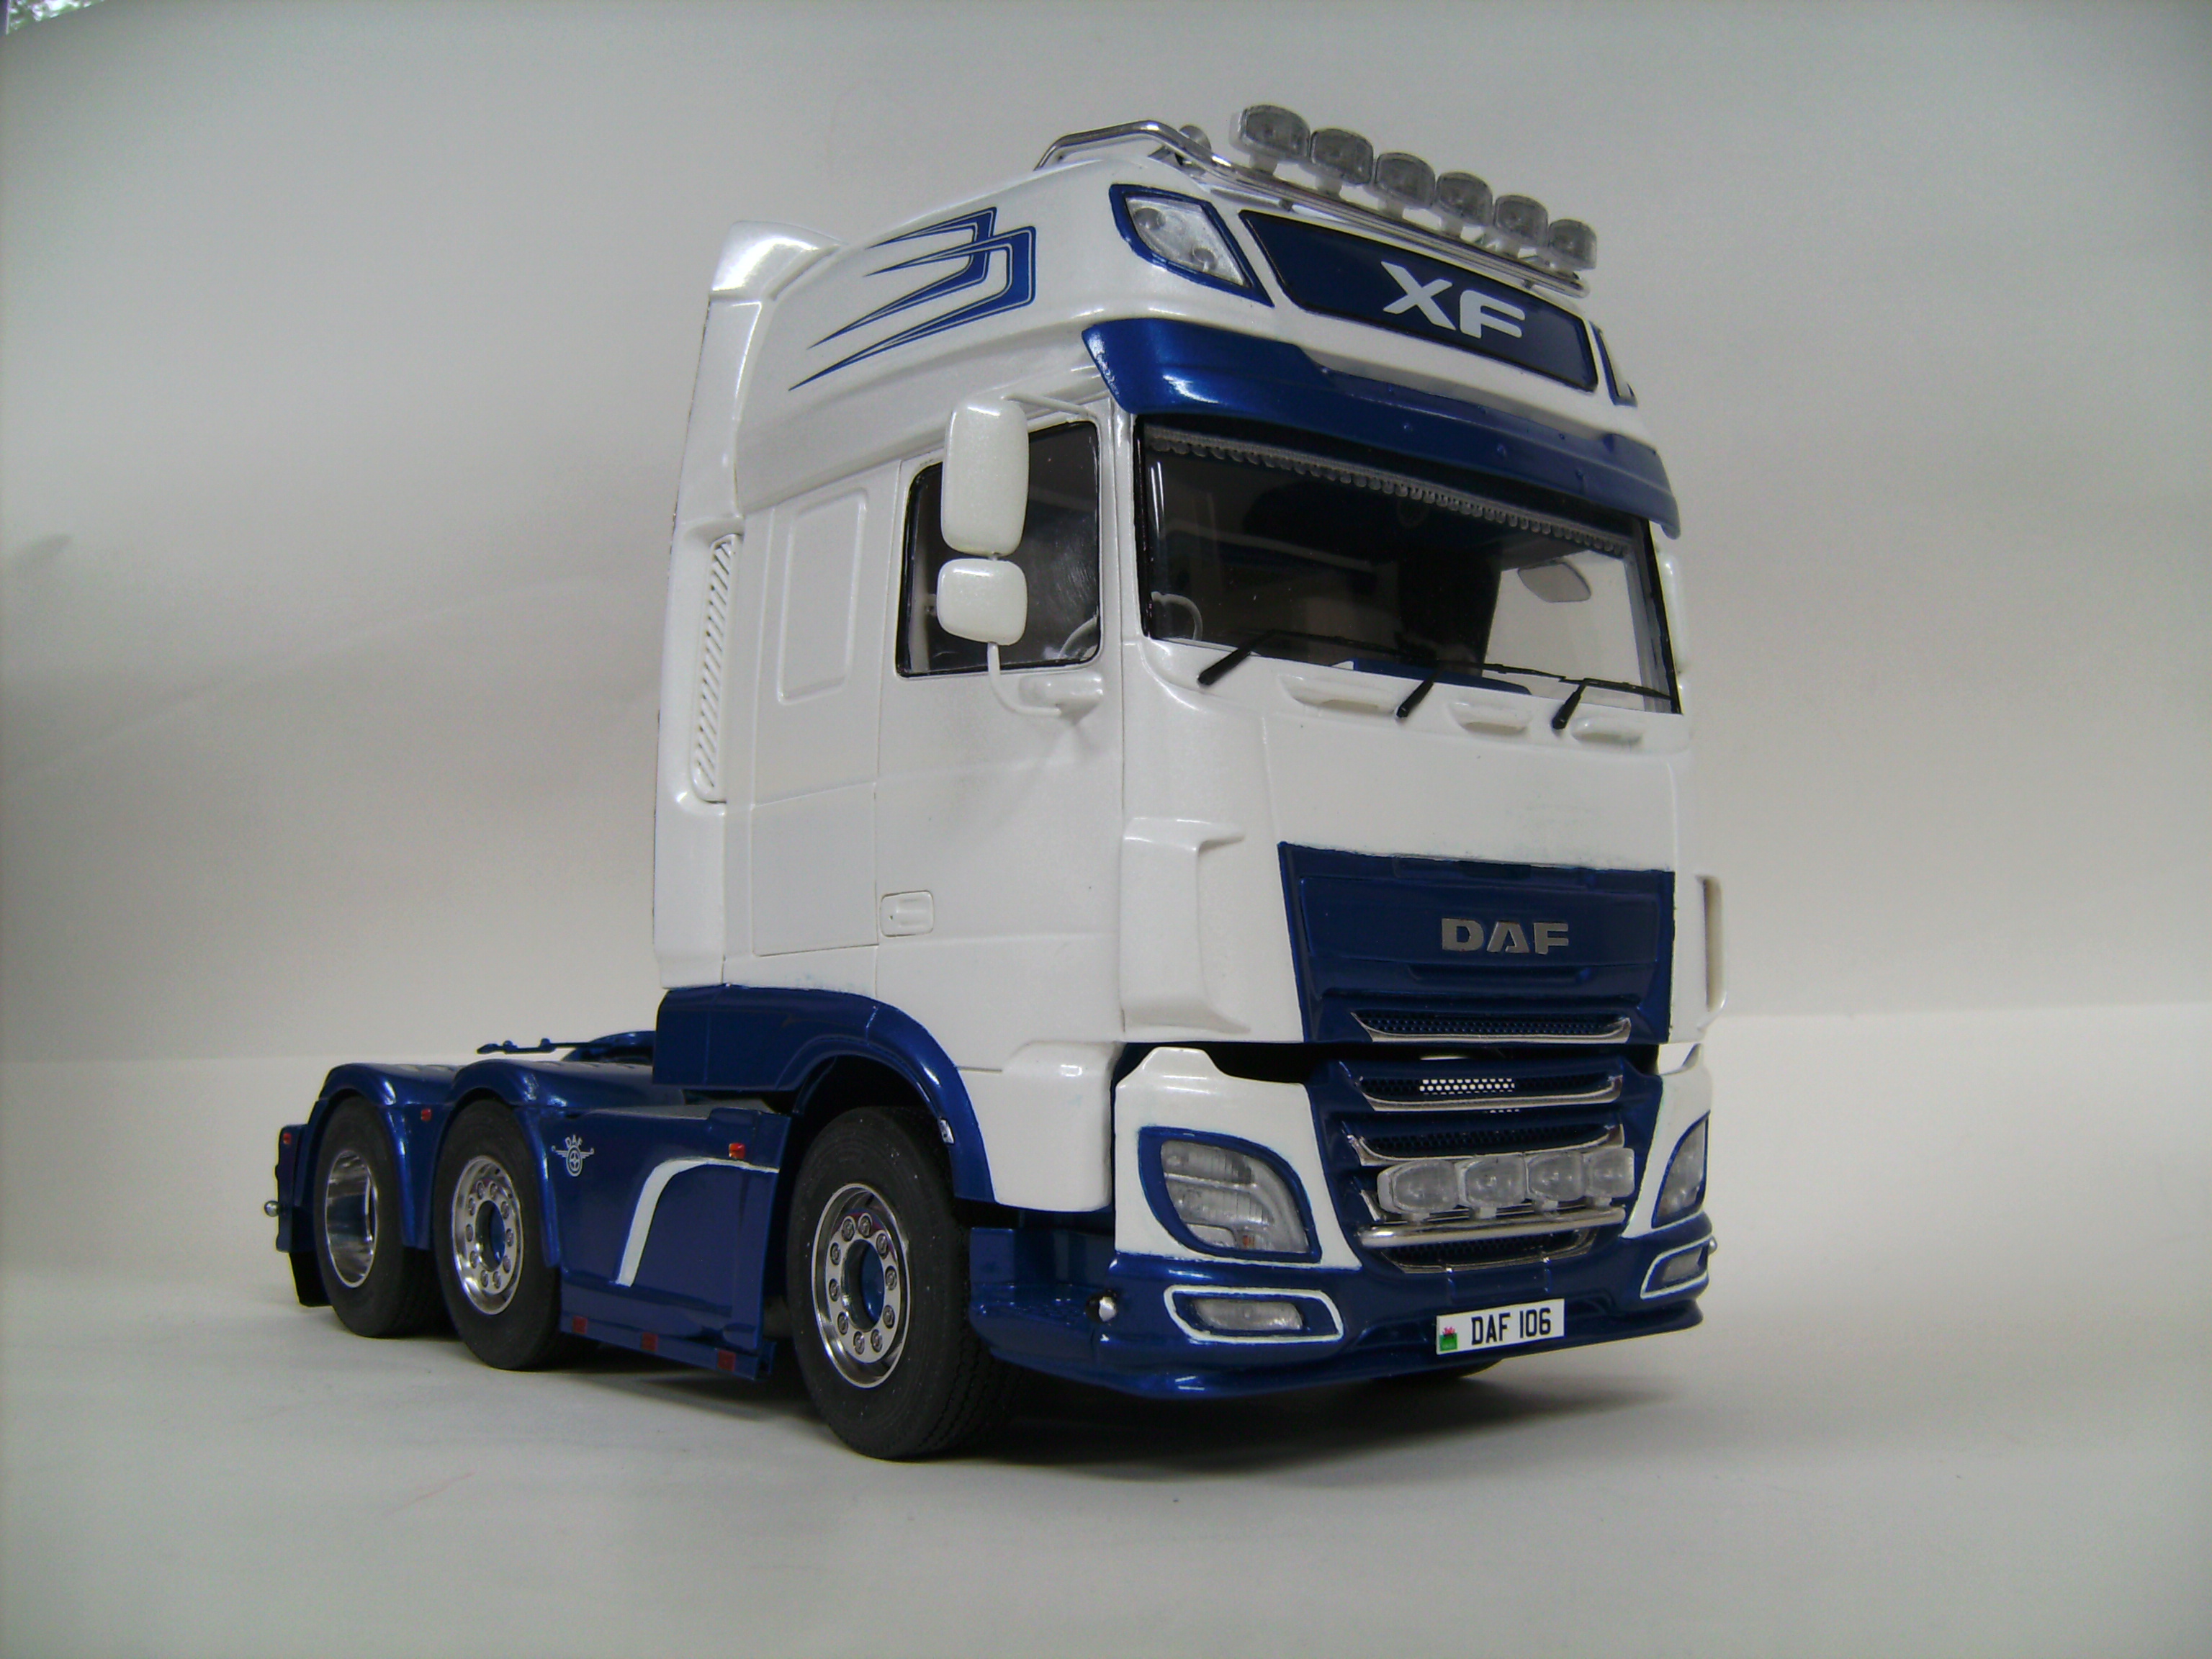 DAF XF106 FTG by Neil Cook, UK